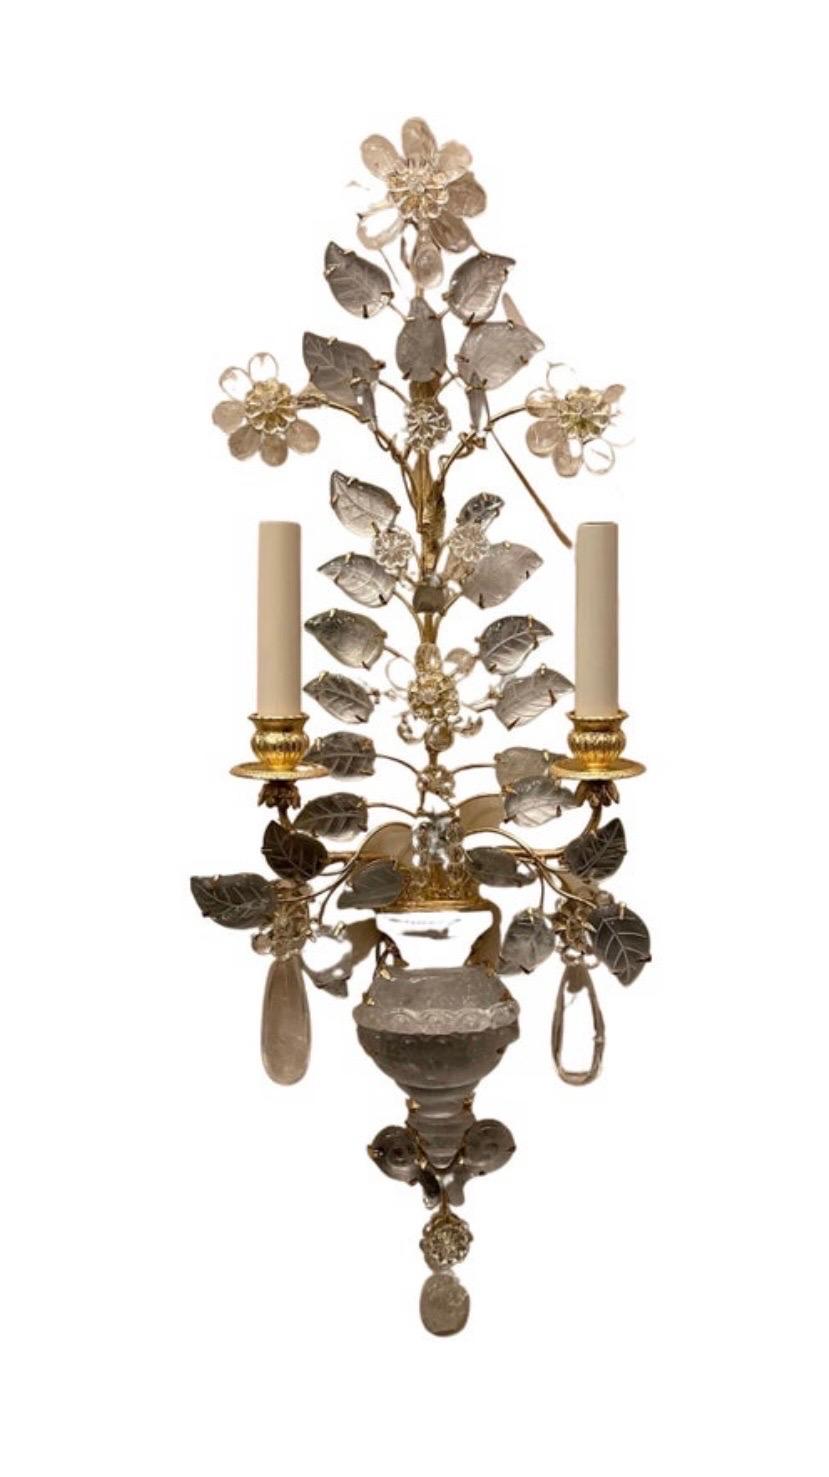 A wonderful pair of Italian rock crystal Baguès style urn and flower form sconces retailed by nestle NYC
Completely rewired with new sockets and wiring.

Two pairs available, each pair sold separately